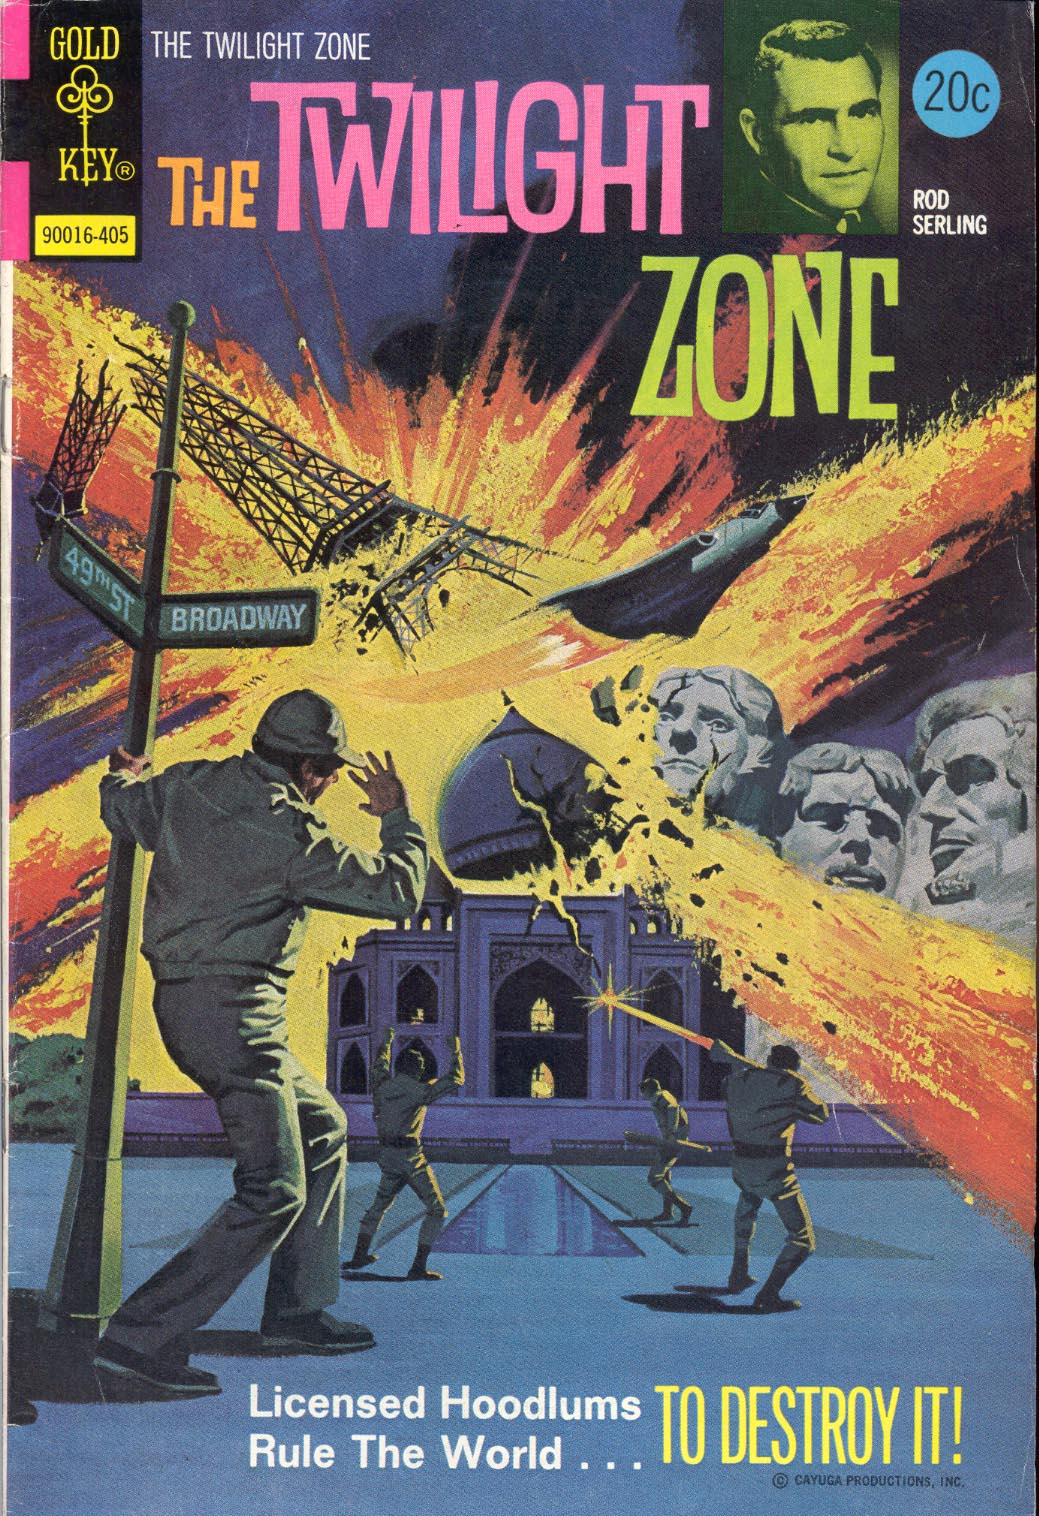 The Twilight Zone 56 | Read The Twilight Zone 56 comic online in high  quality. Read Full Comic online for free - Read comics online in high  quality .| READ COMIC ONLINE